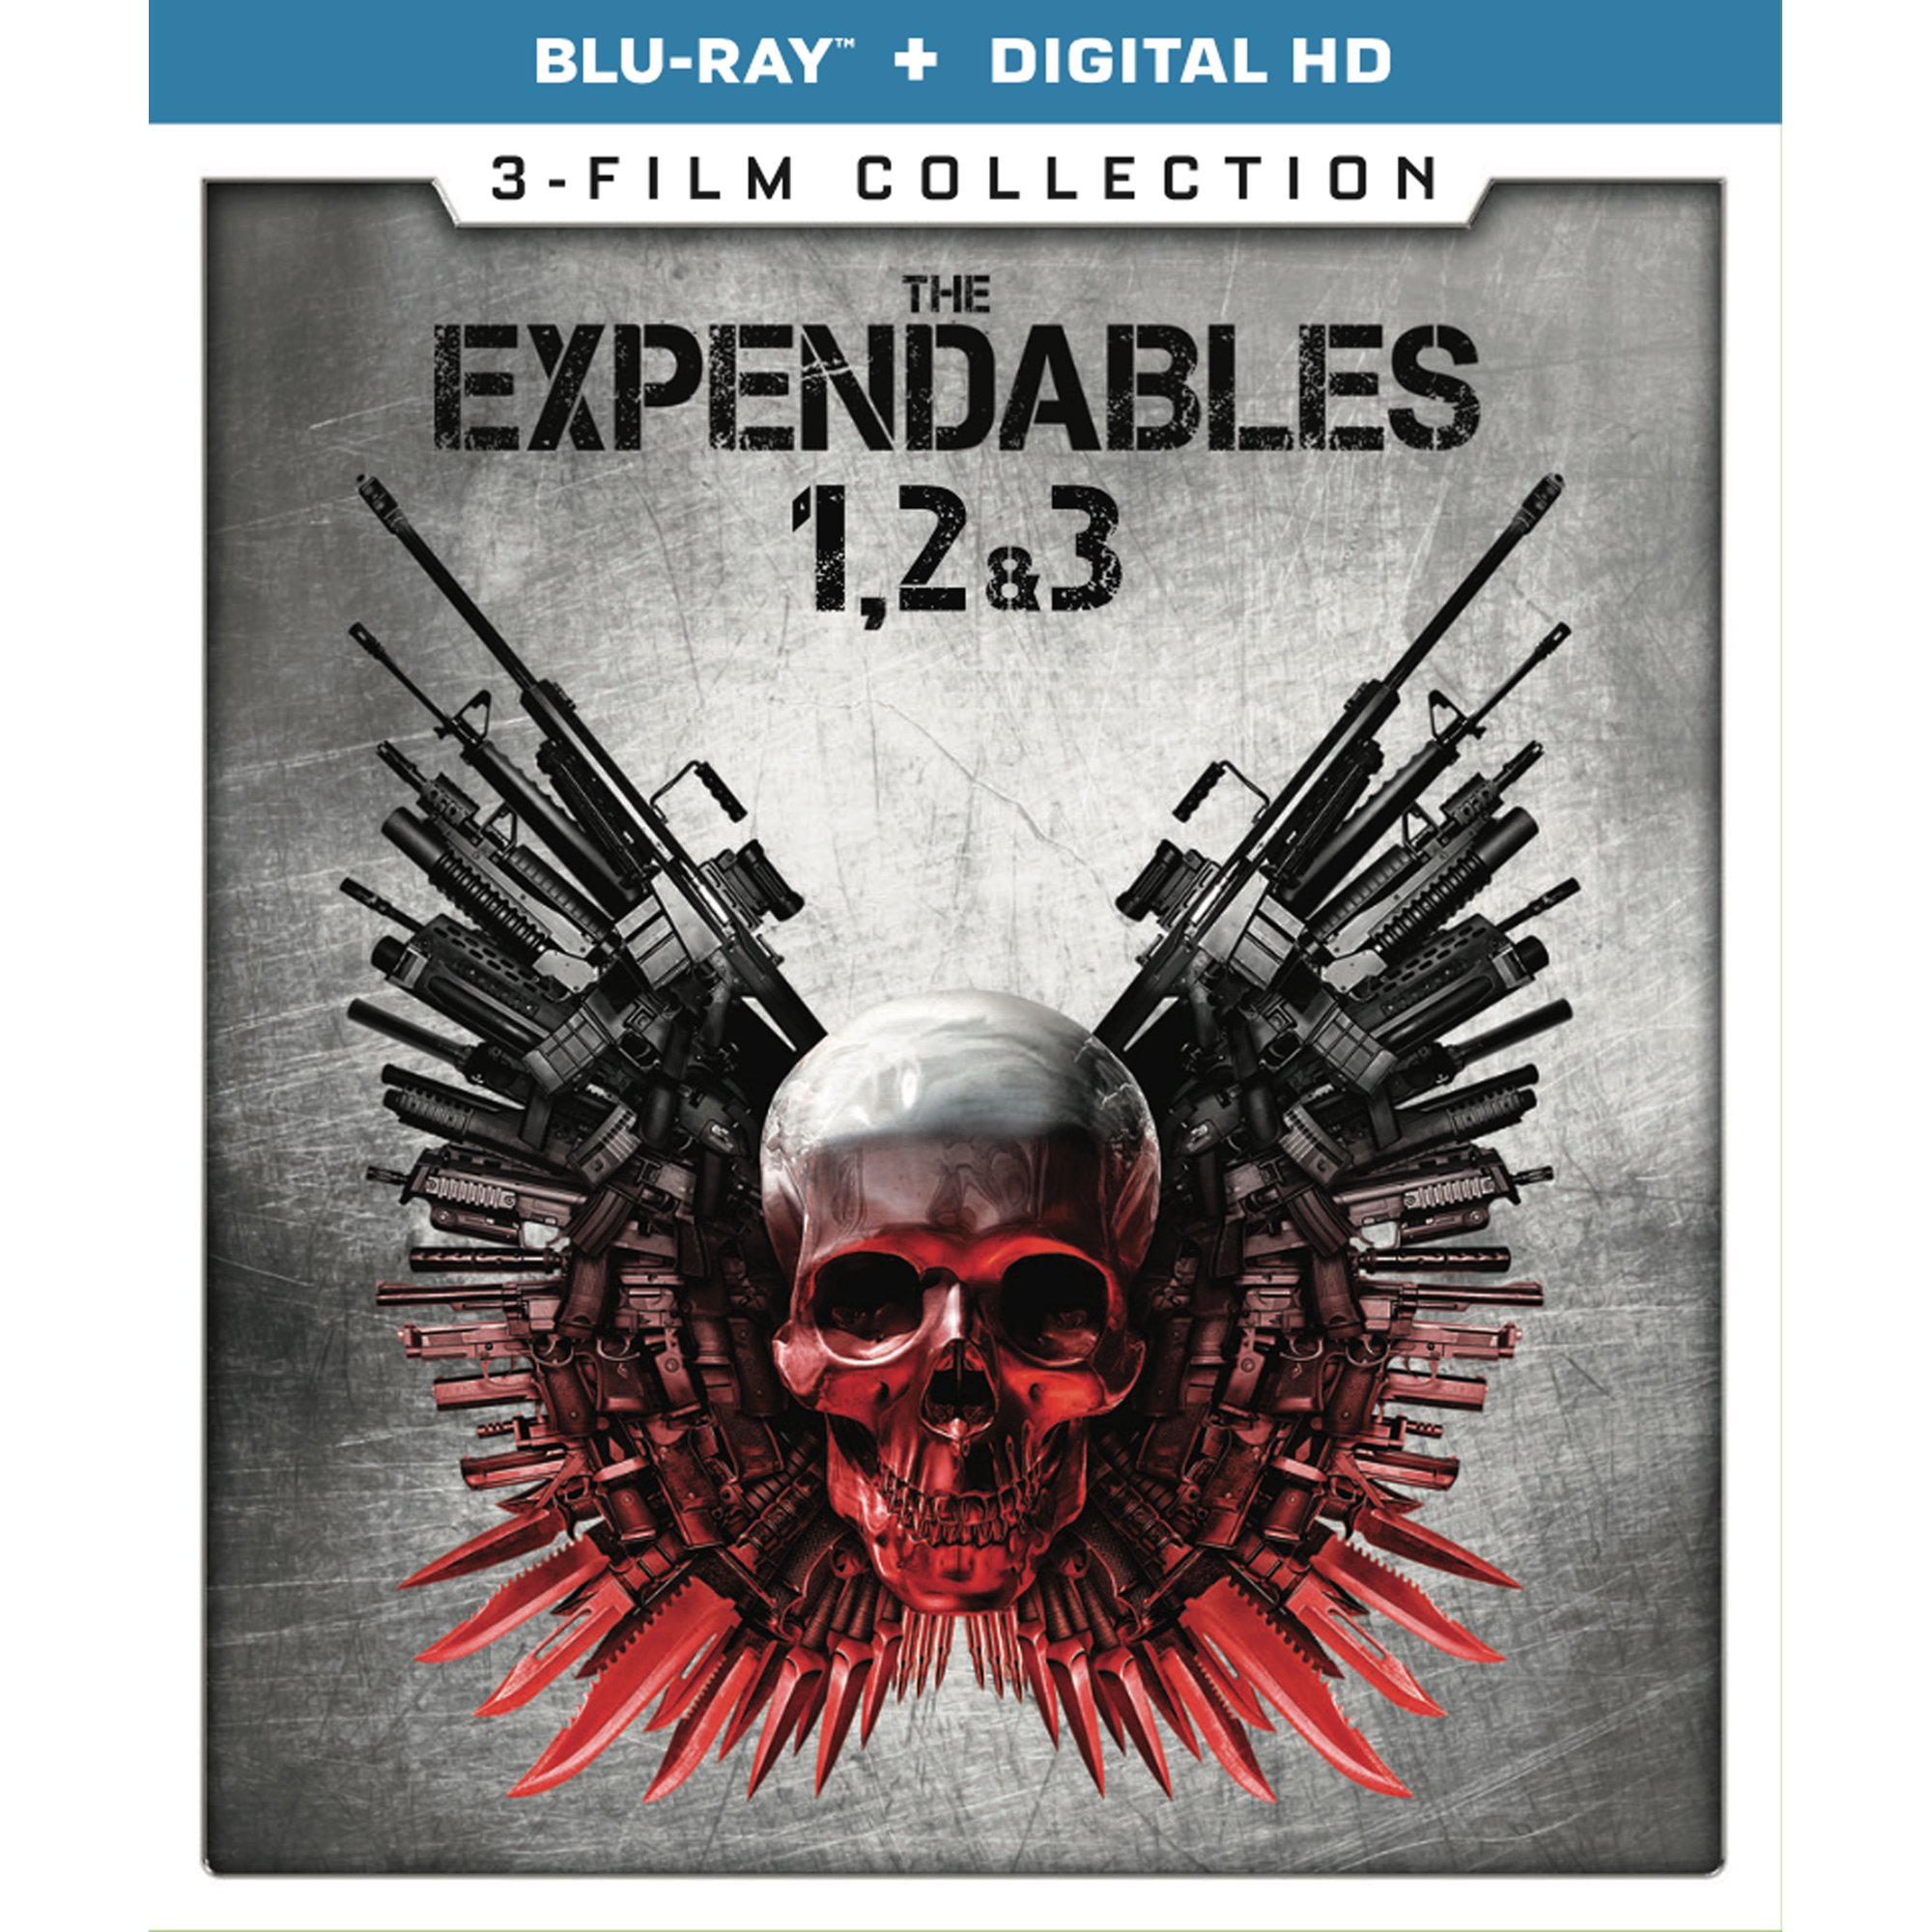 The Expendables: 3-Film Collection (Digital) - Blu-ray [ 2014 ]  - Action Movies On Blu-ray - Movies On GRUV